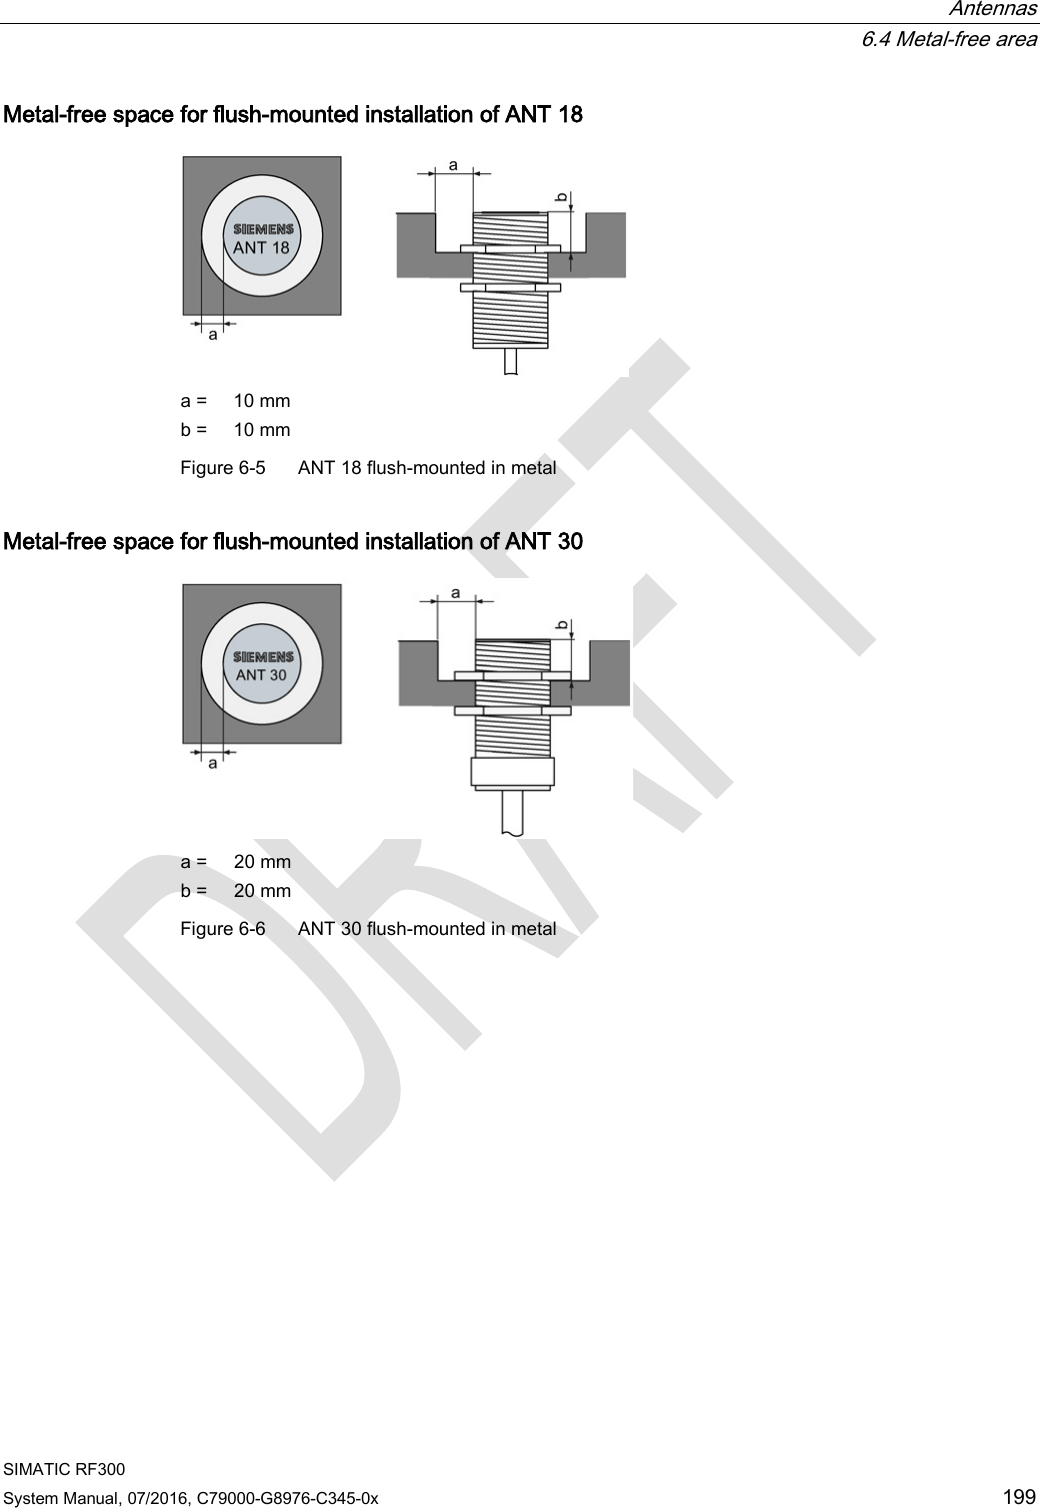  Antennas   6.4 Metal-free area SIMATIC RF300 System Manual, 07/2016, C79000-G8976-C345-0x 199 Metal-free space for flush-mounted installation of ANT 18  a = 10 mm b = 10 mm Figure 6-5  ANT 18 flush-mounted in metal  Metal-free space for flush-mounted installation of ANT 30  a = 20 mm b = 20 mm Figure 6-6  ANT 30 flush-mounted in metal   